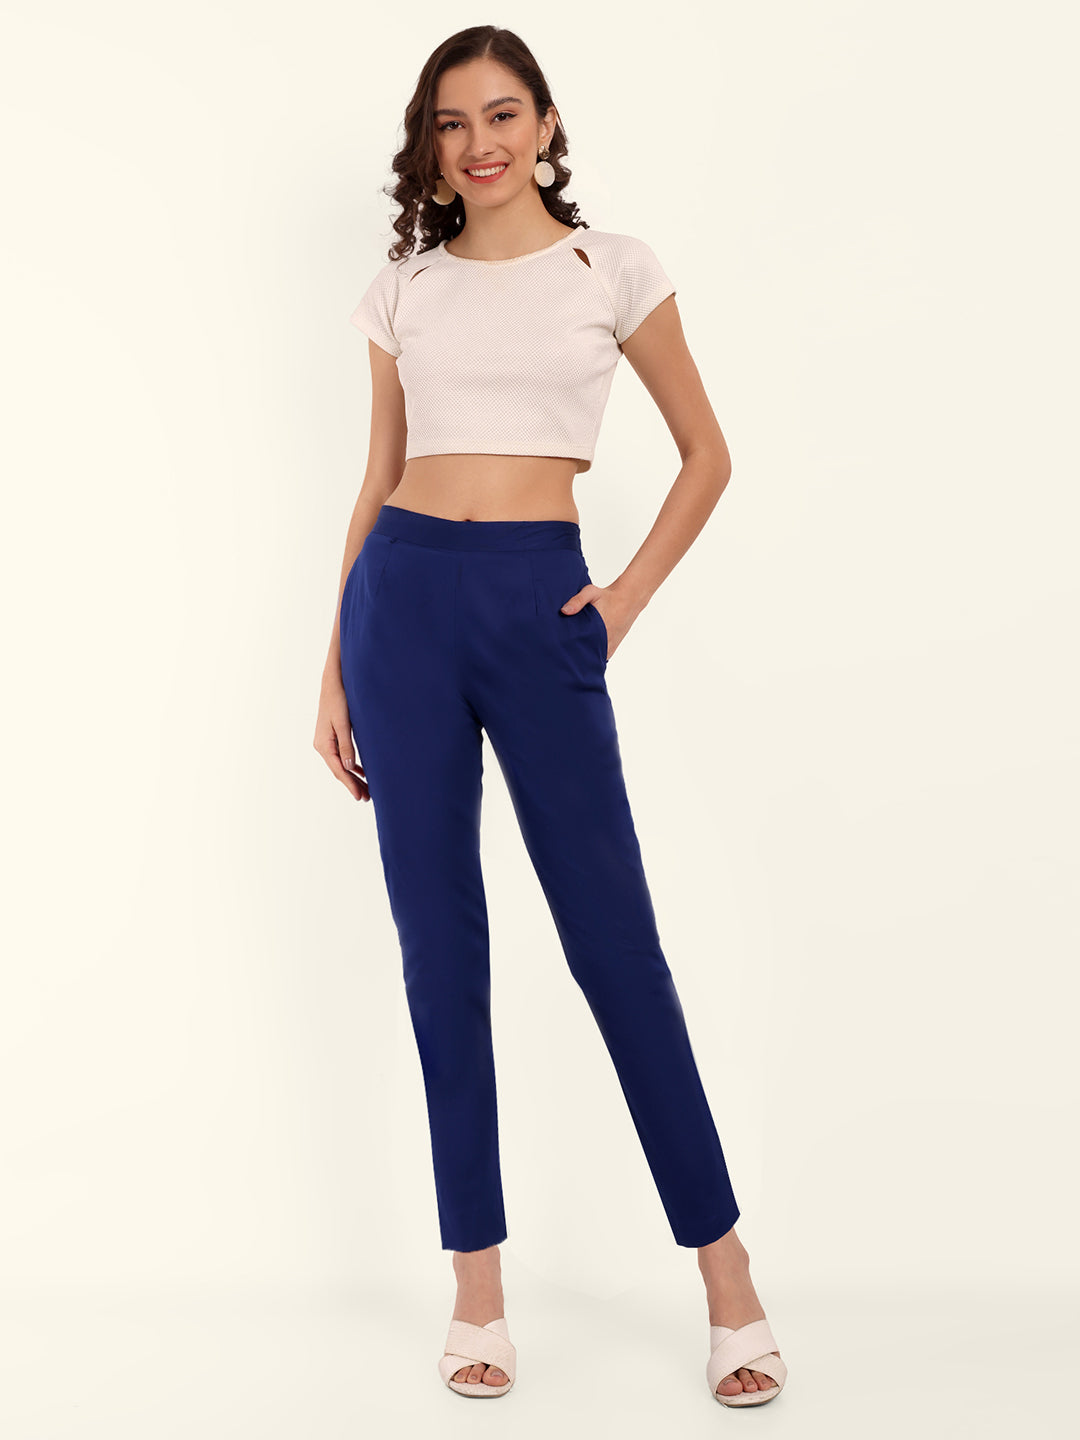 New Year's Eve Handbook | Athleisure outfits, Royal blue pants, Outfits